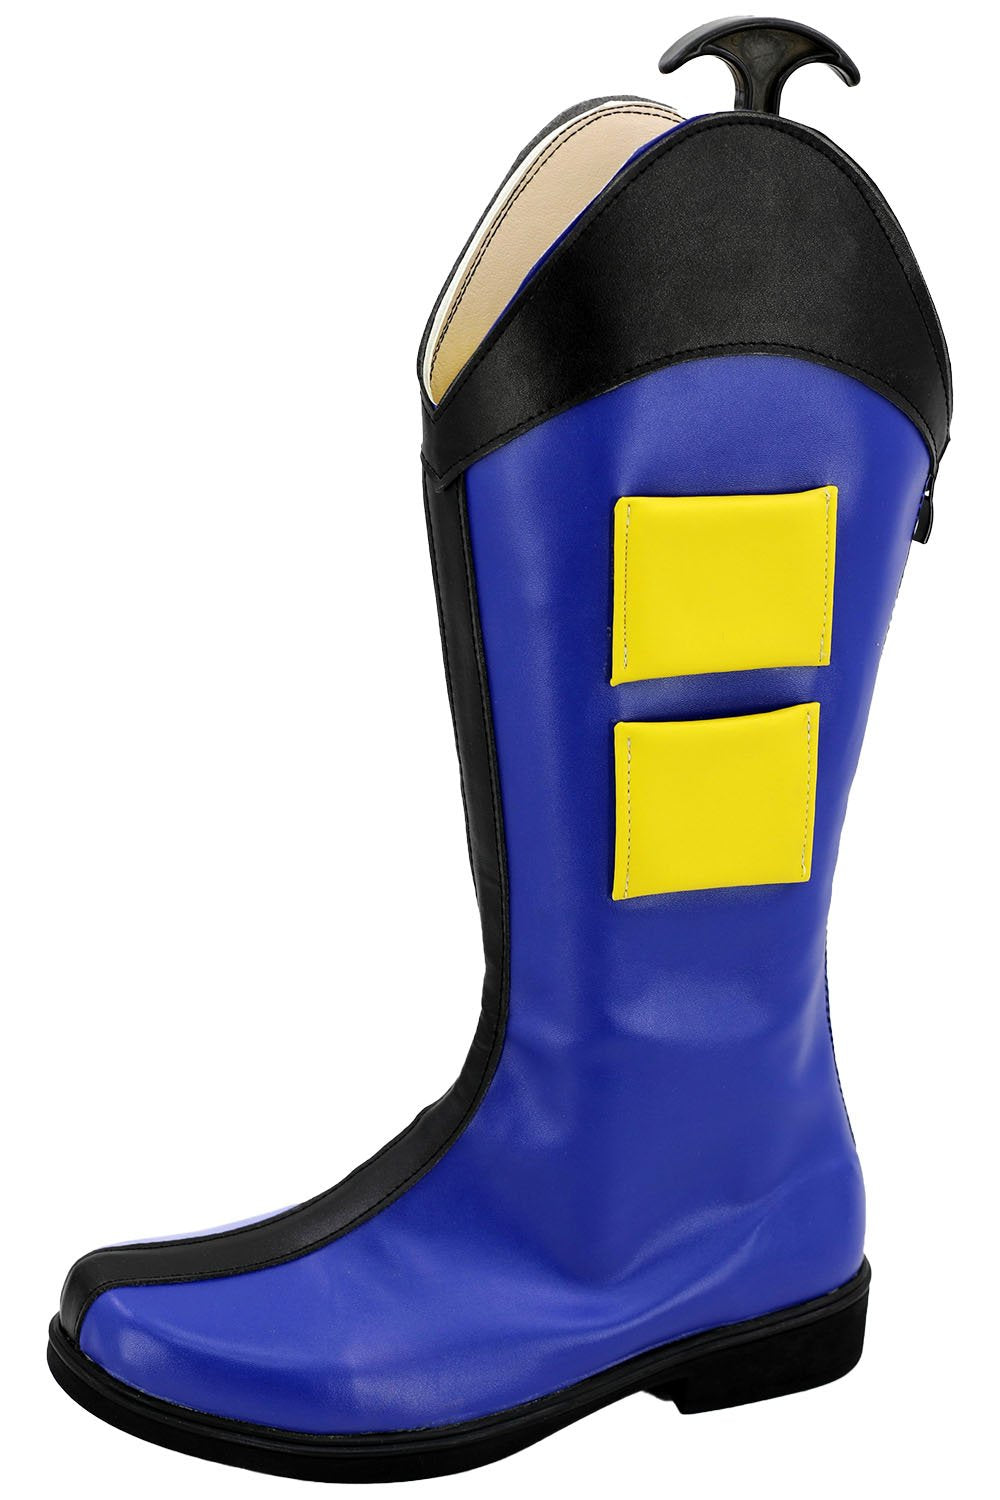 X-MEN: Wolverine Boots Cosplay Shoes